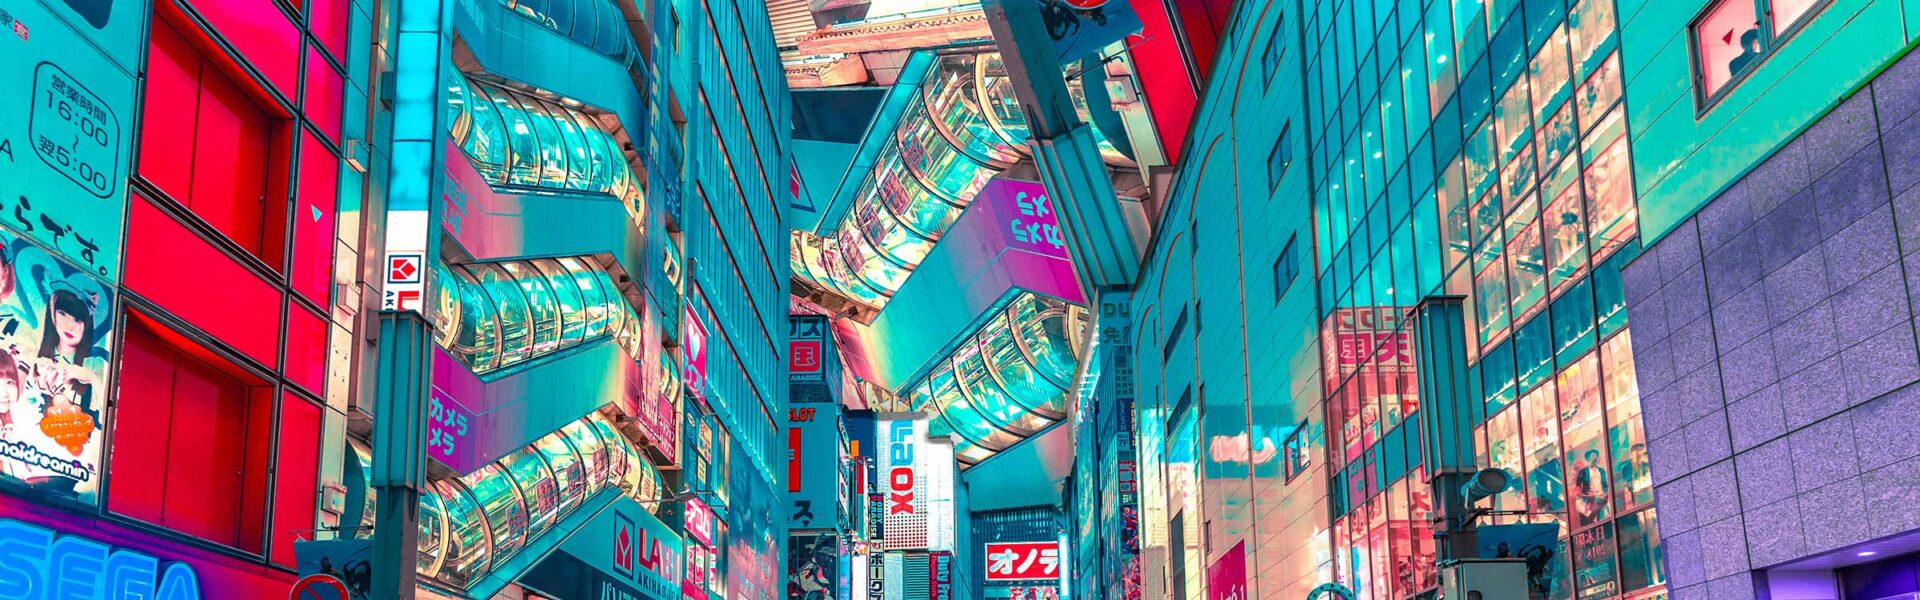 Colorful store fronts on a street in Tokyo.